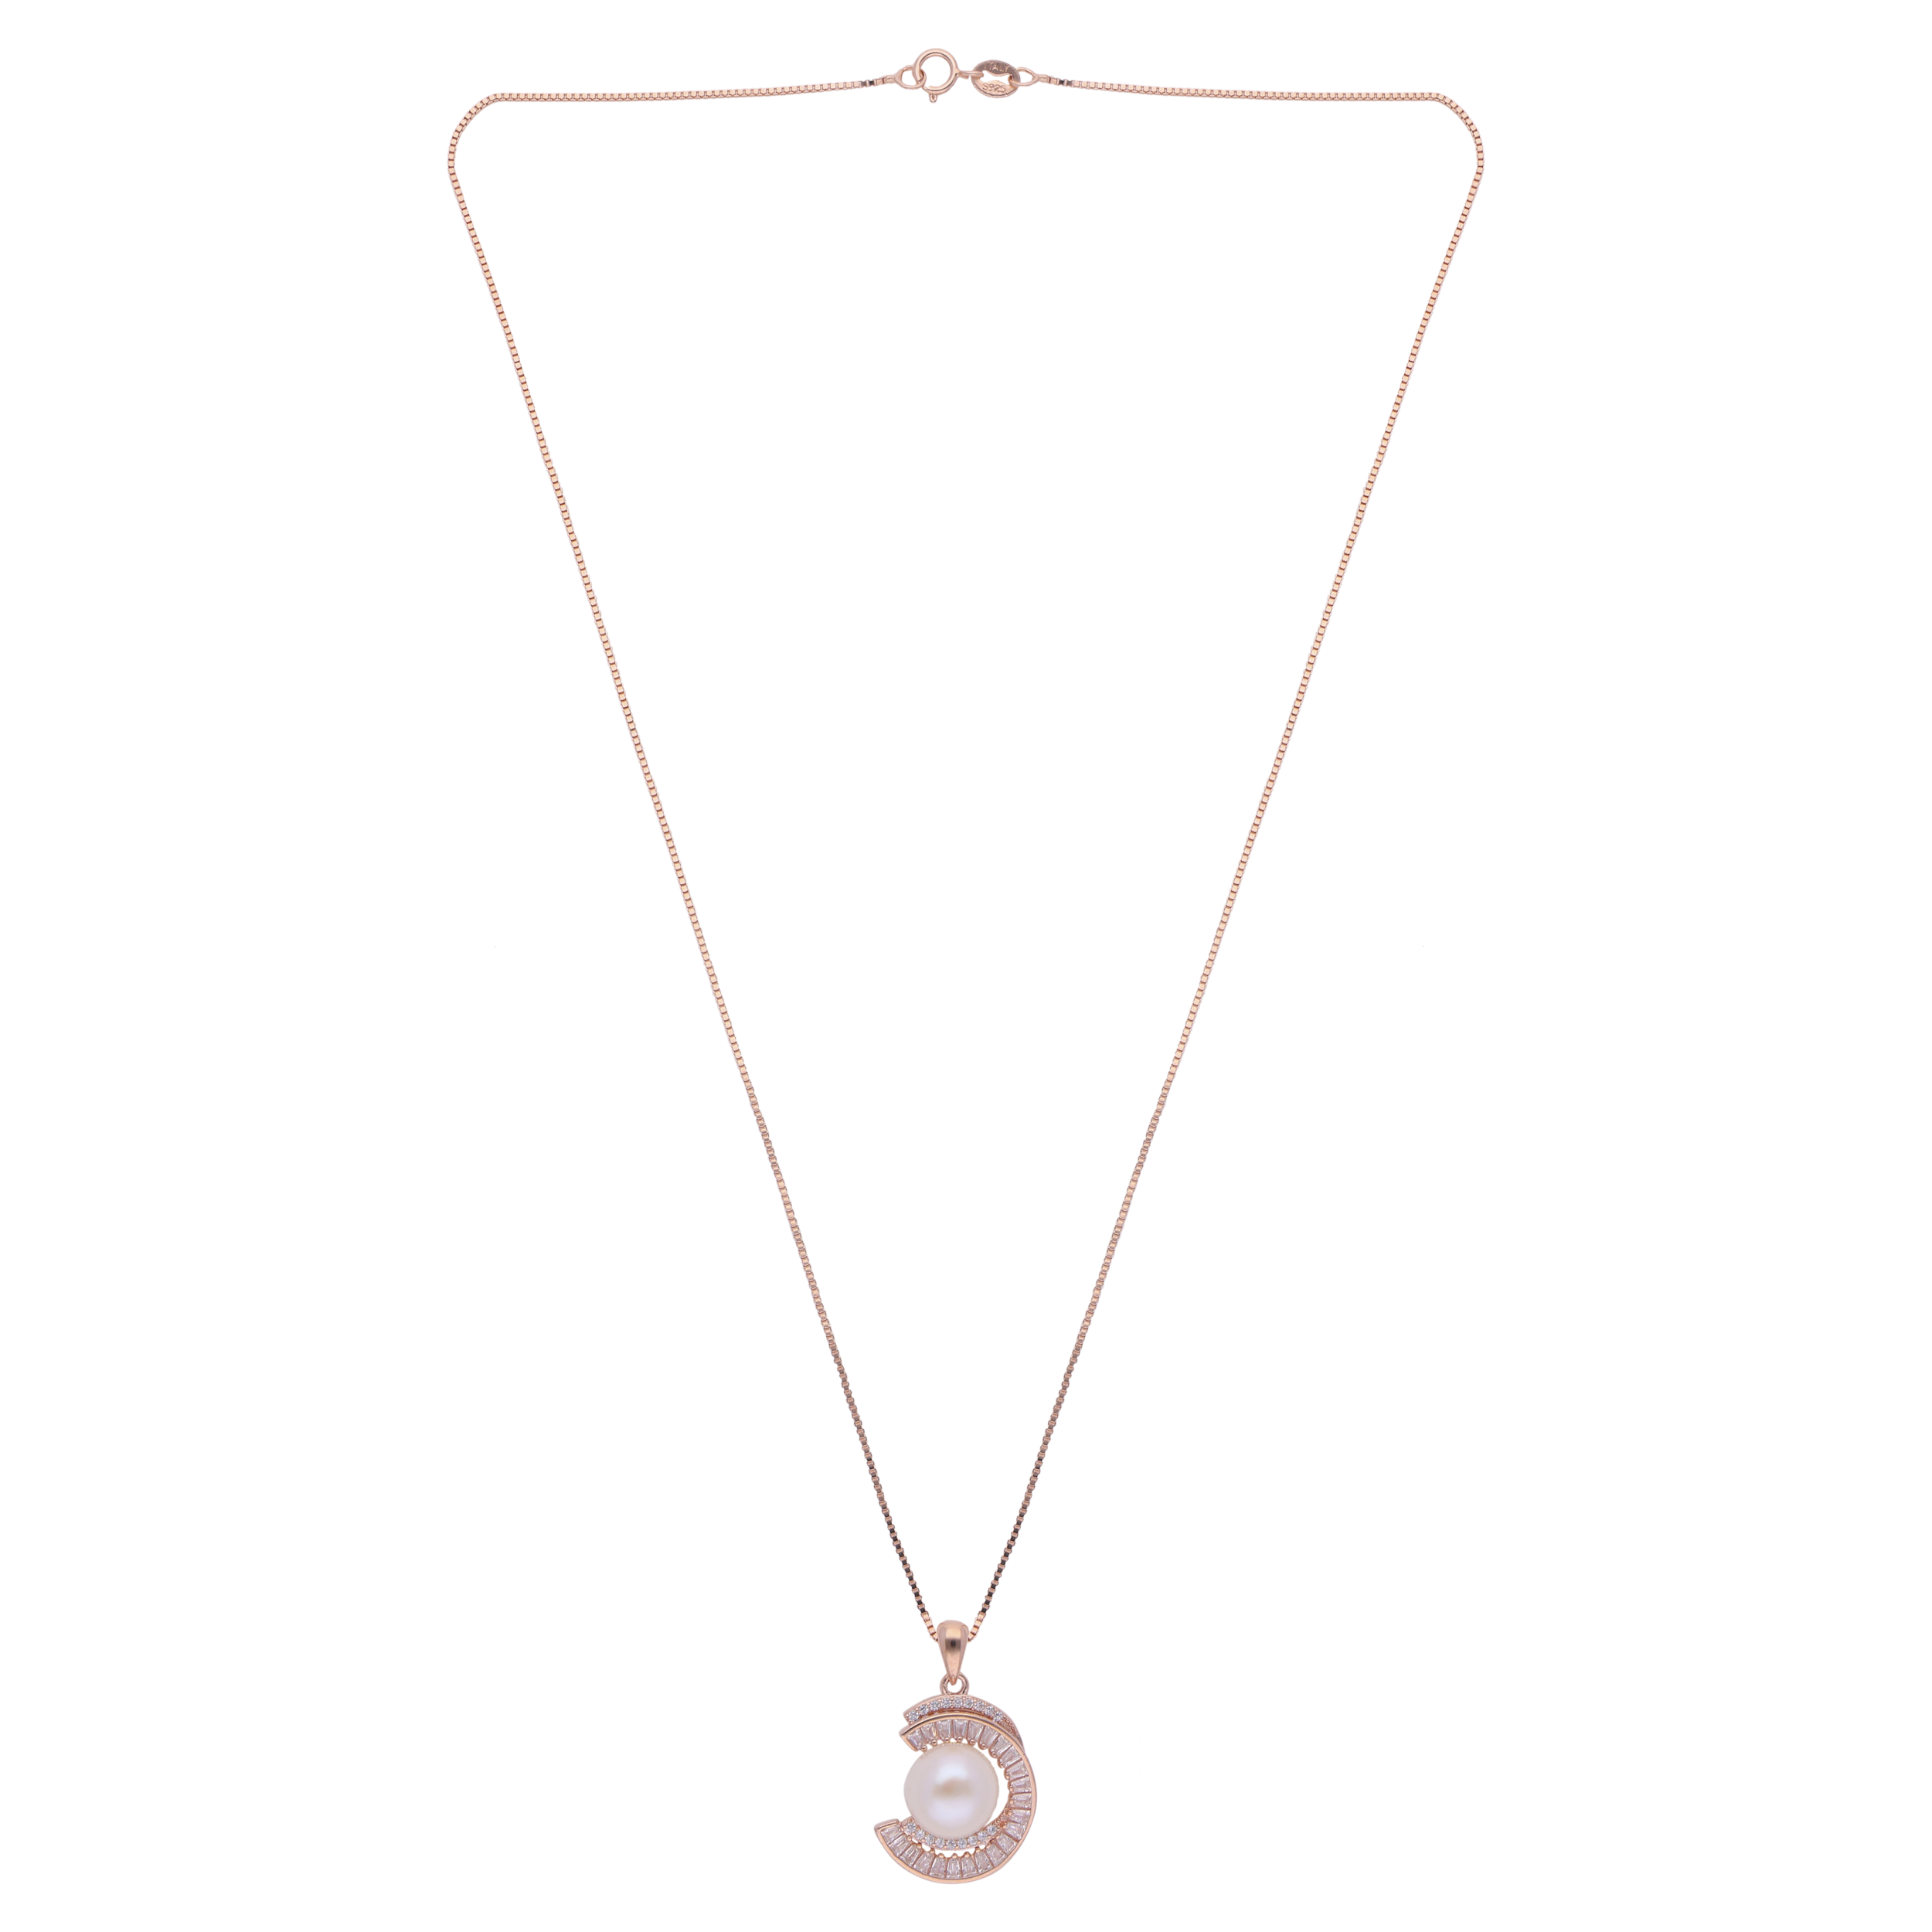 Radiant Rose: Sterling Silver Chain Pendant with Cubic Zirconia and Pearl in Rose Gold | SKU : 0019884097, 0019884073, 0019884134, 0019884110